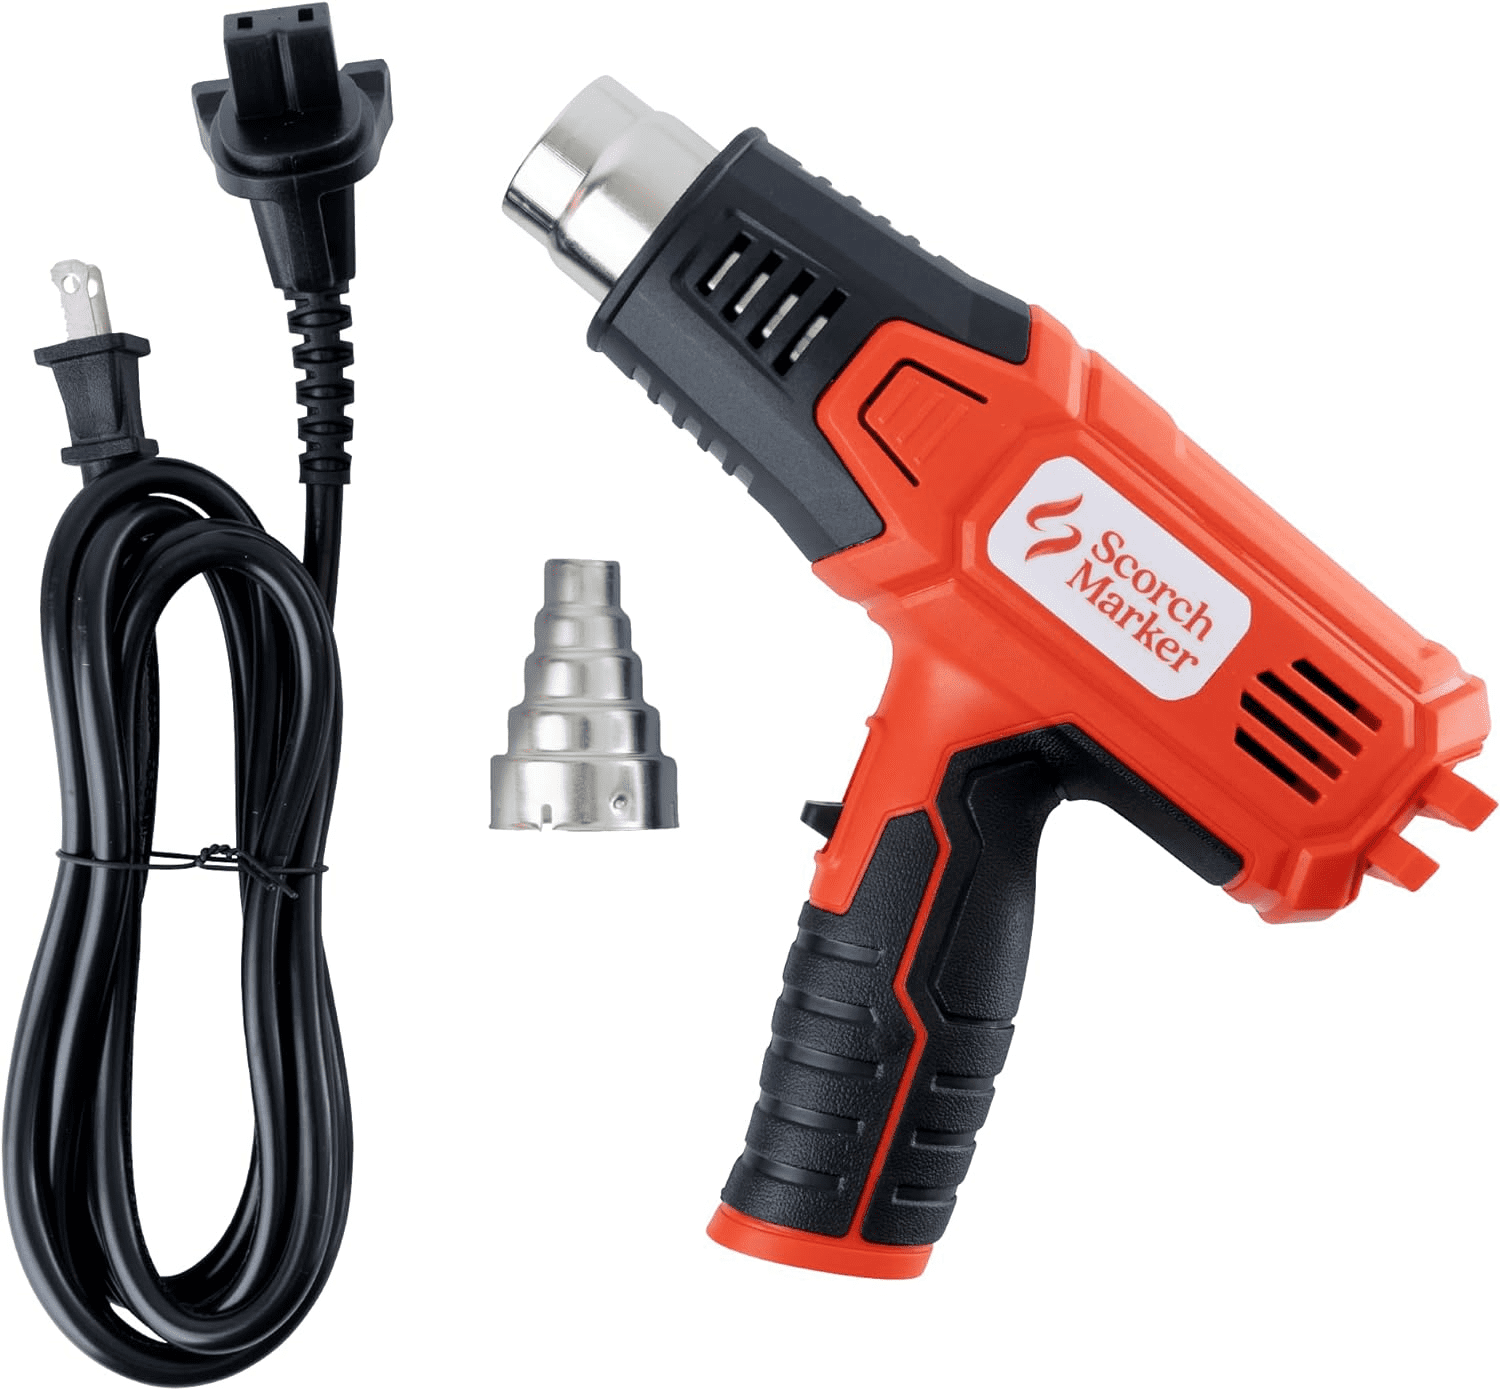 Heat Gun 1800 Watt Variable Speed High and Low For Craft Projects and DIY  with Tip Attachment 